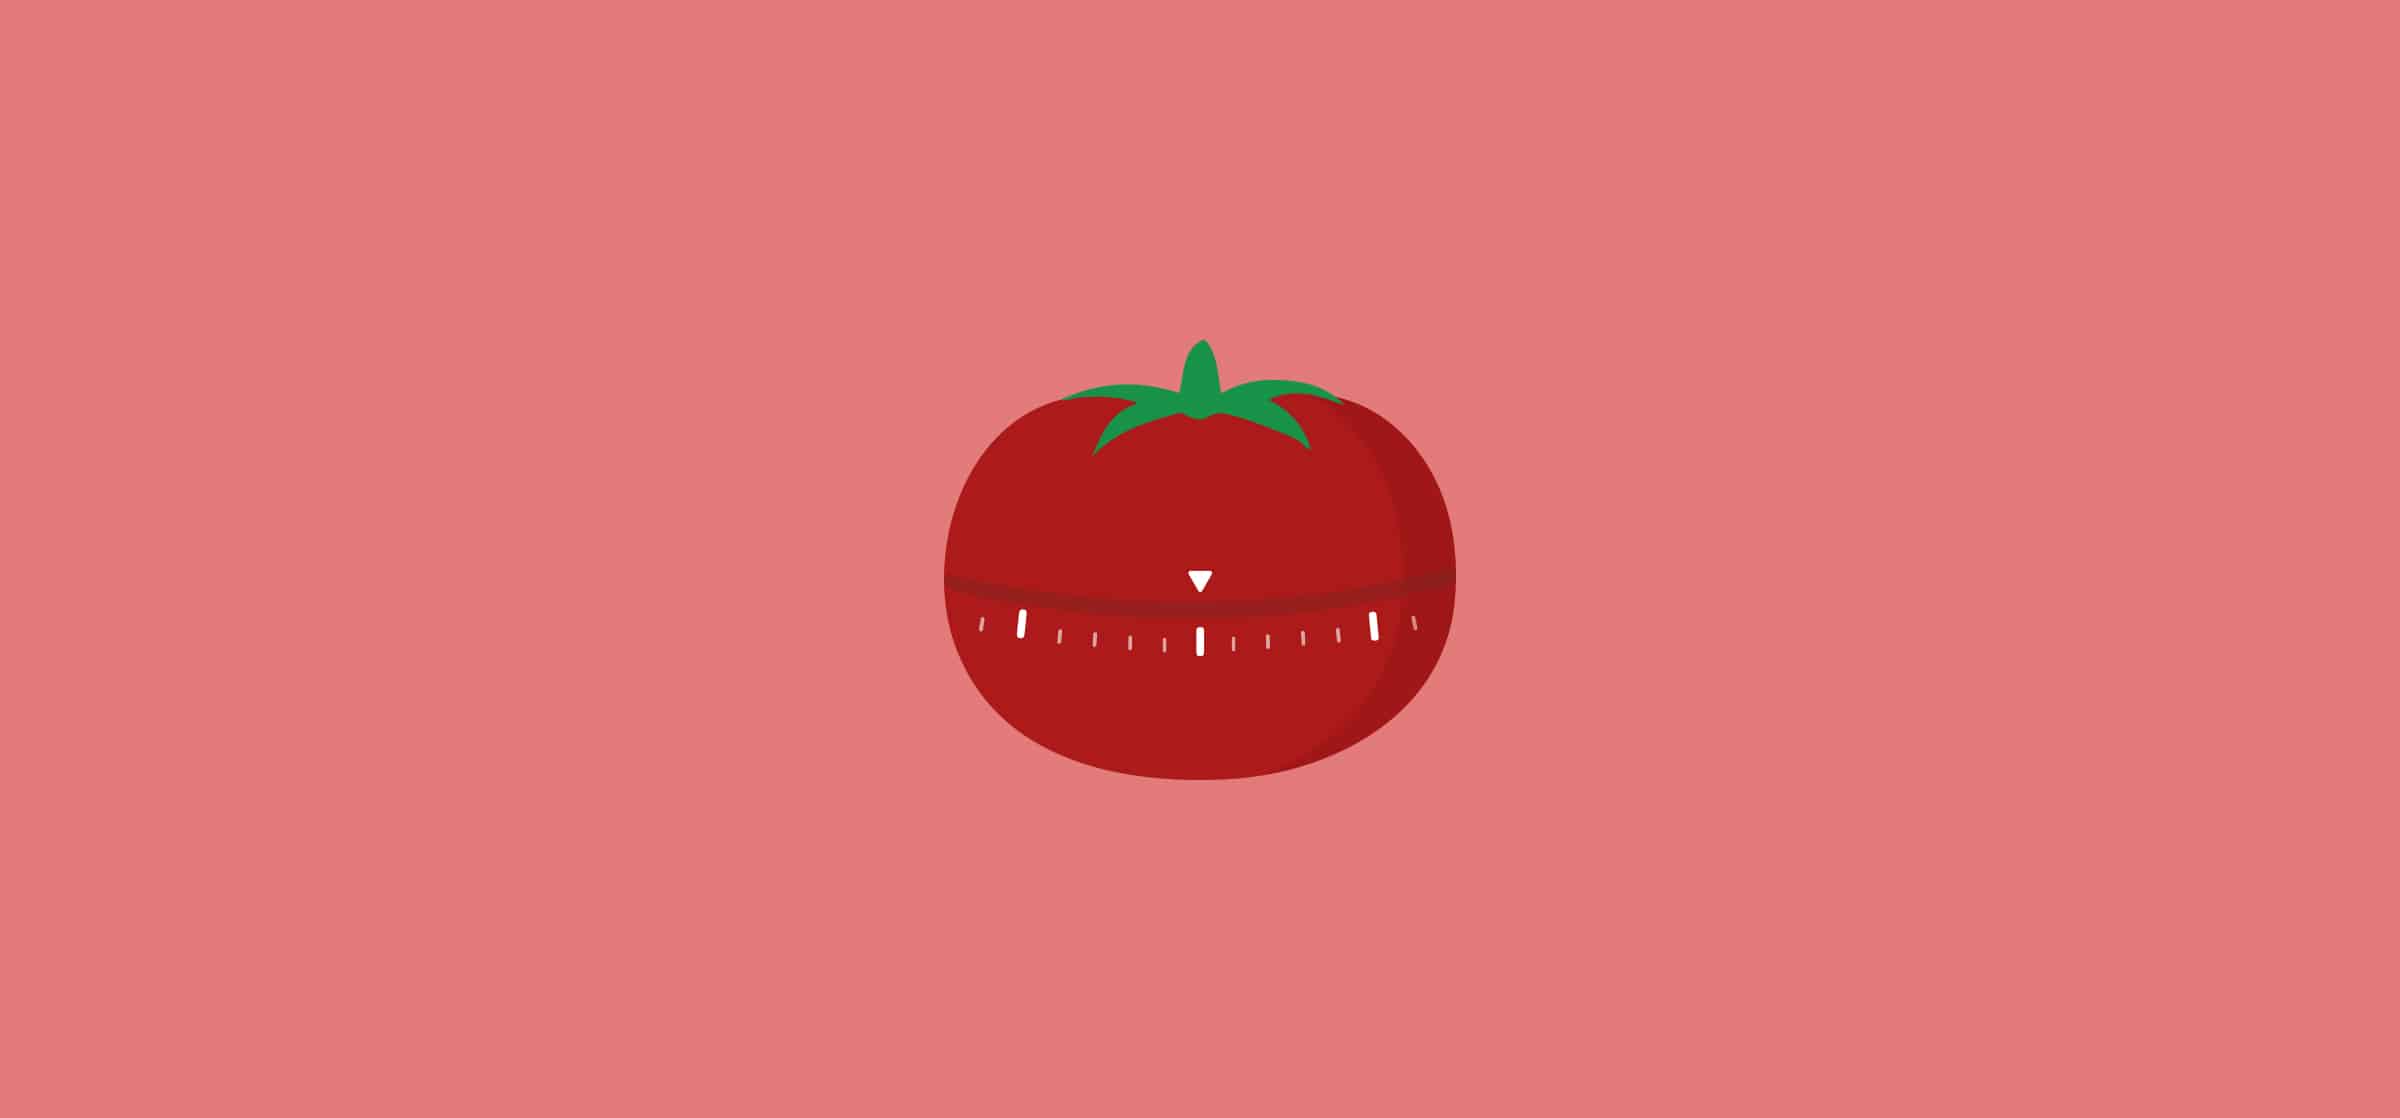 How to Use the Pomodoro Technique (And Why)